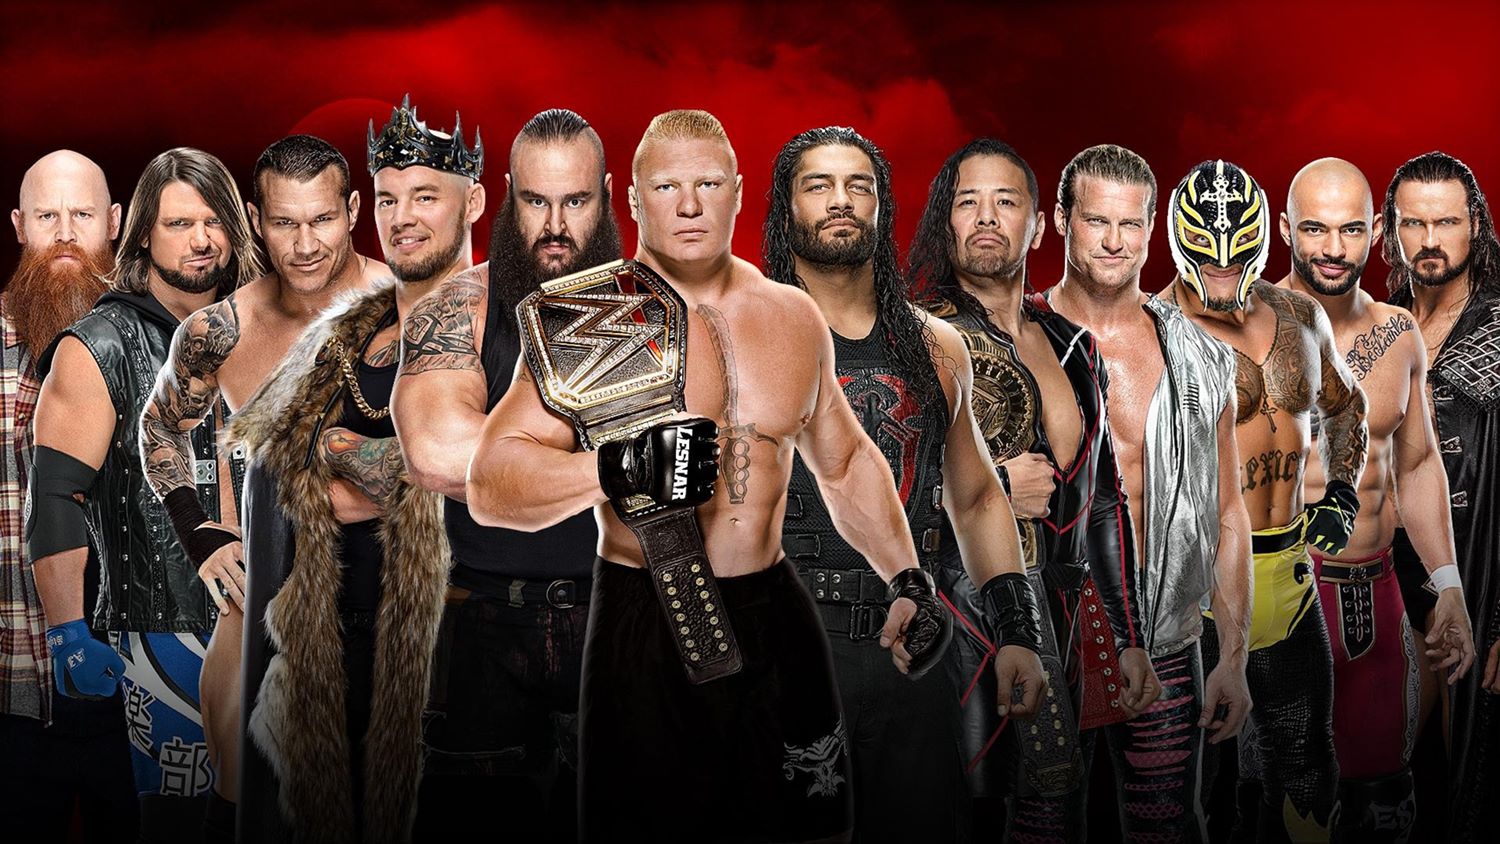 How To Watch The Royal Rumble